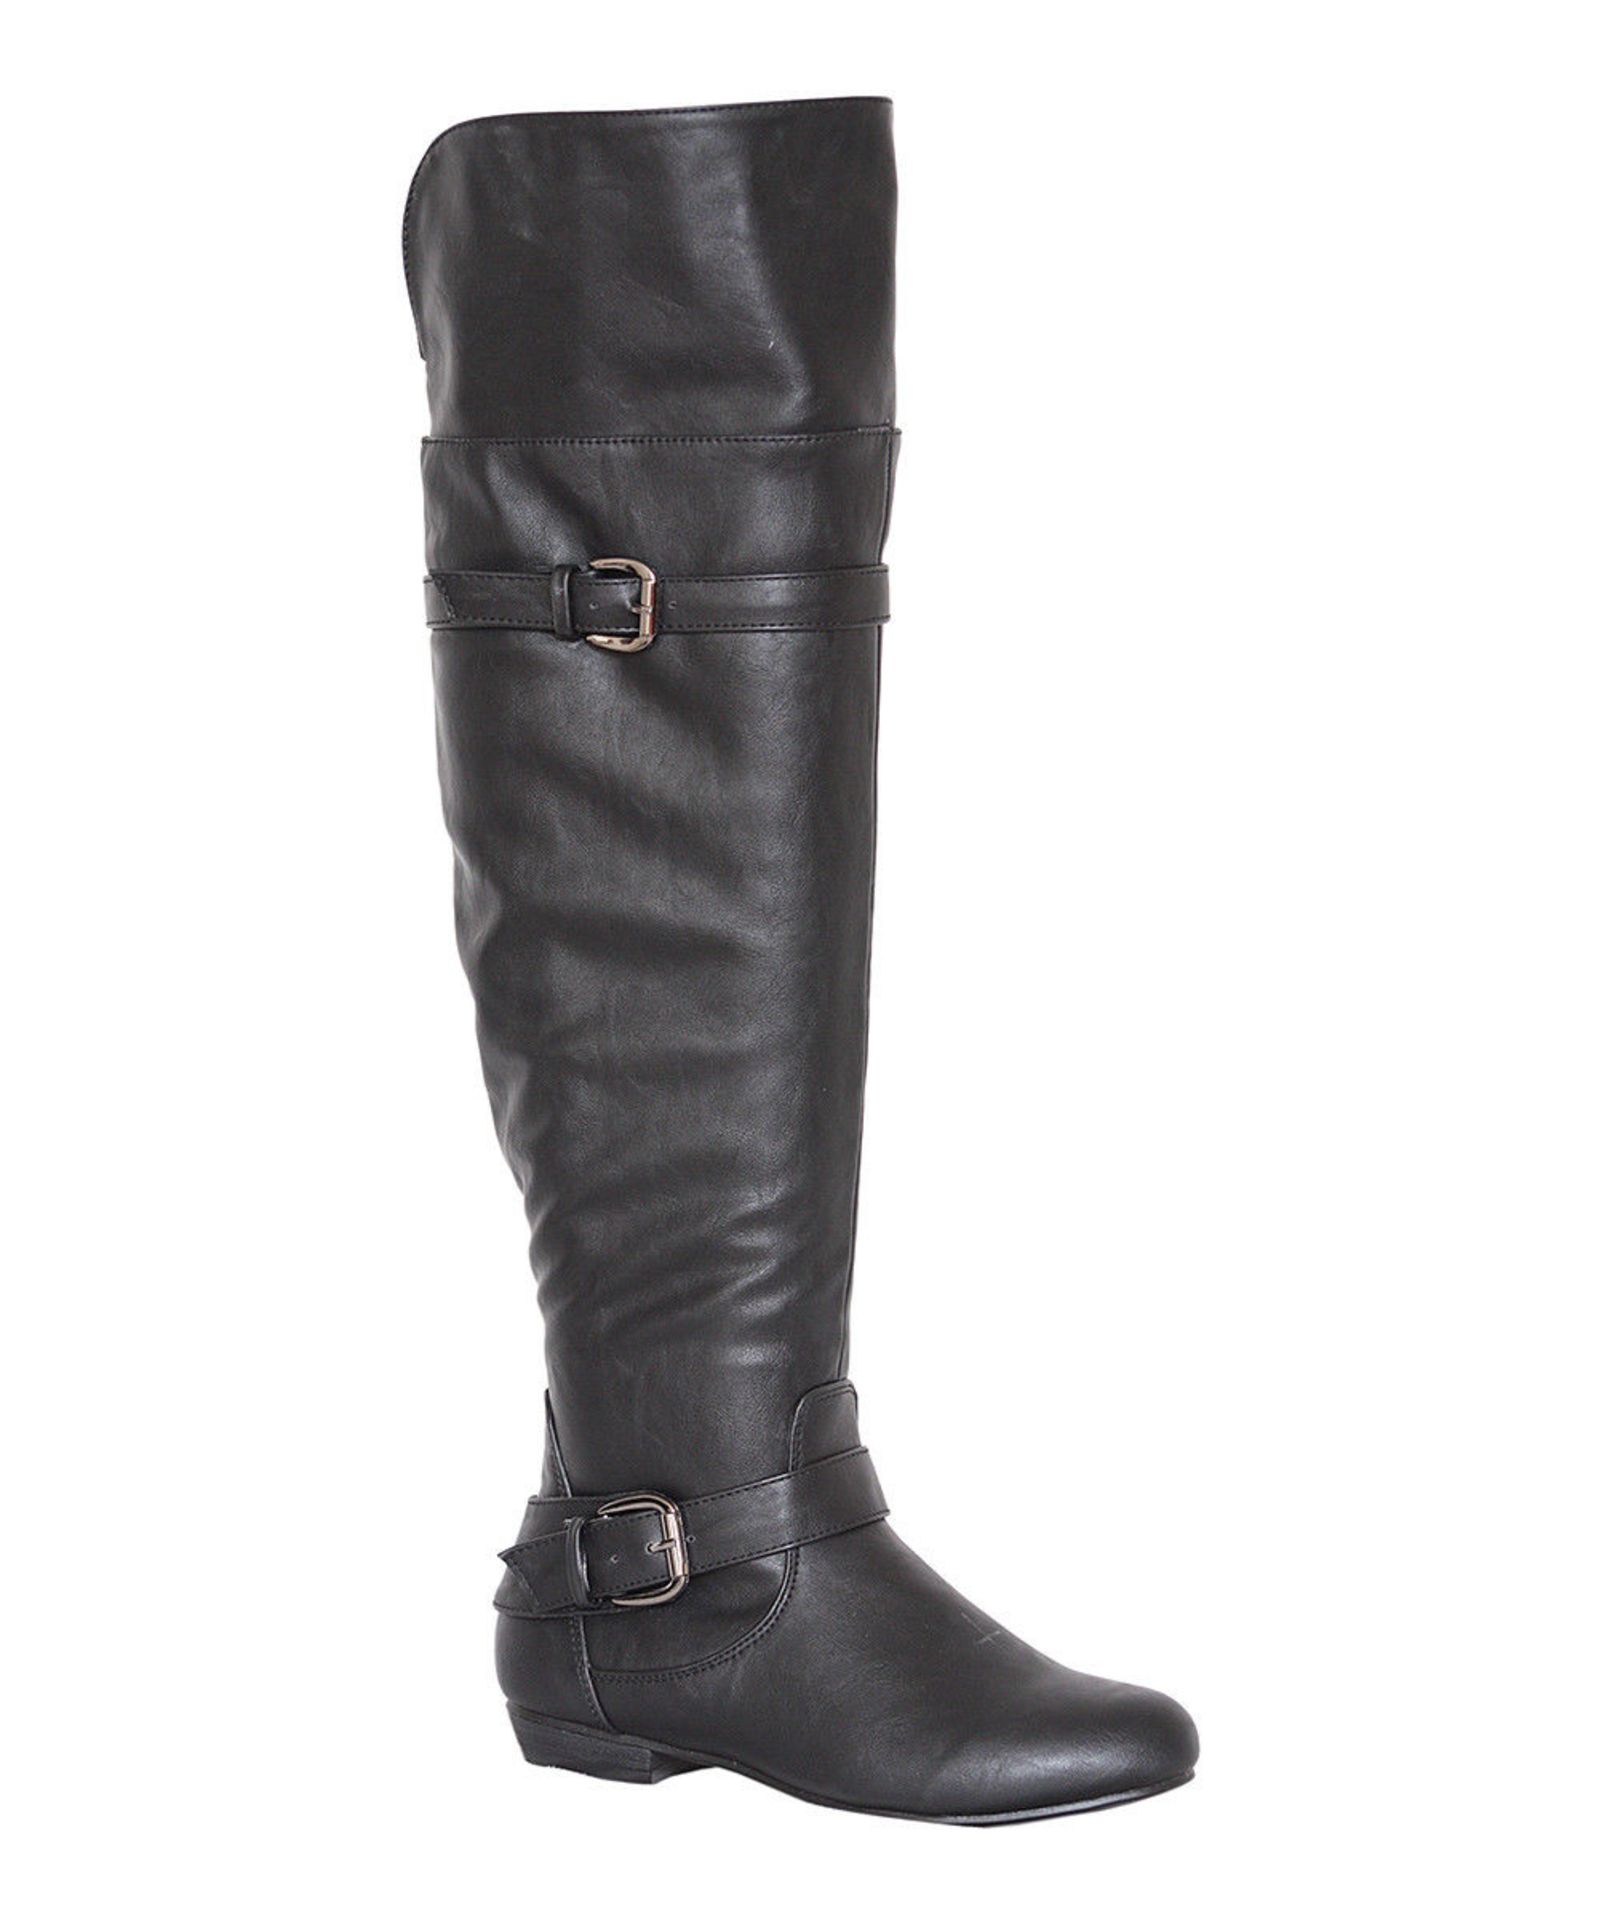 Ball Band Black Olivia Knee-High Boot (Uk Size 5:Us Size 7) (New with box) [Ref: 34372982-D-004]